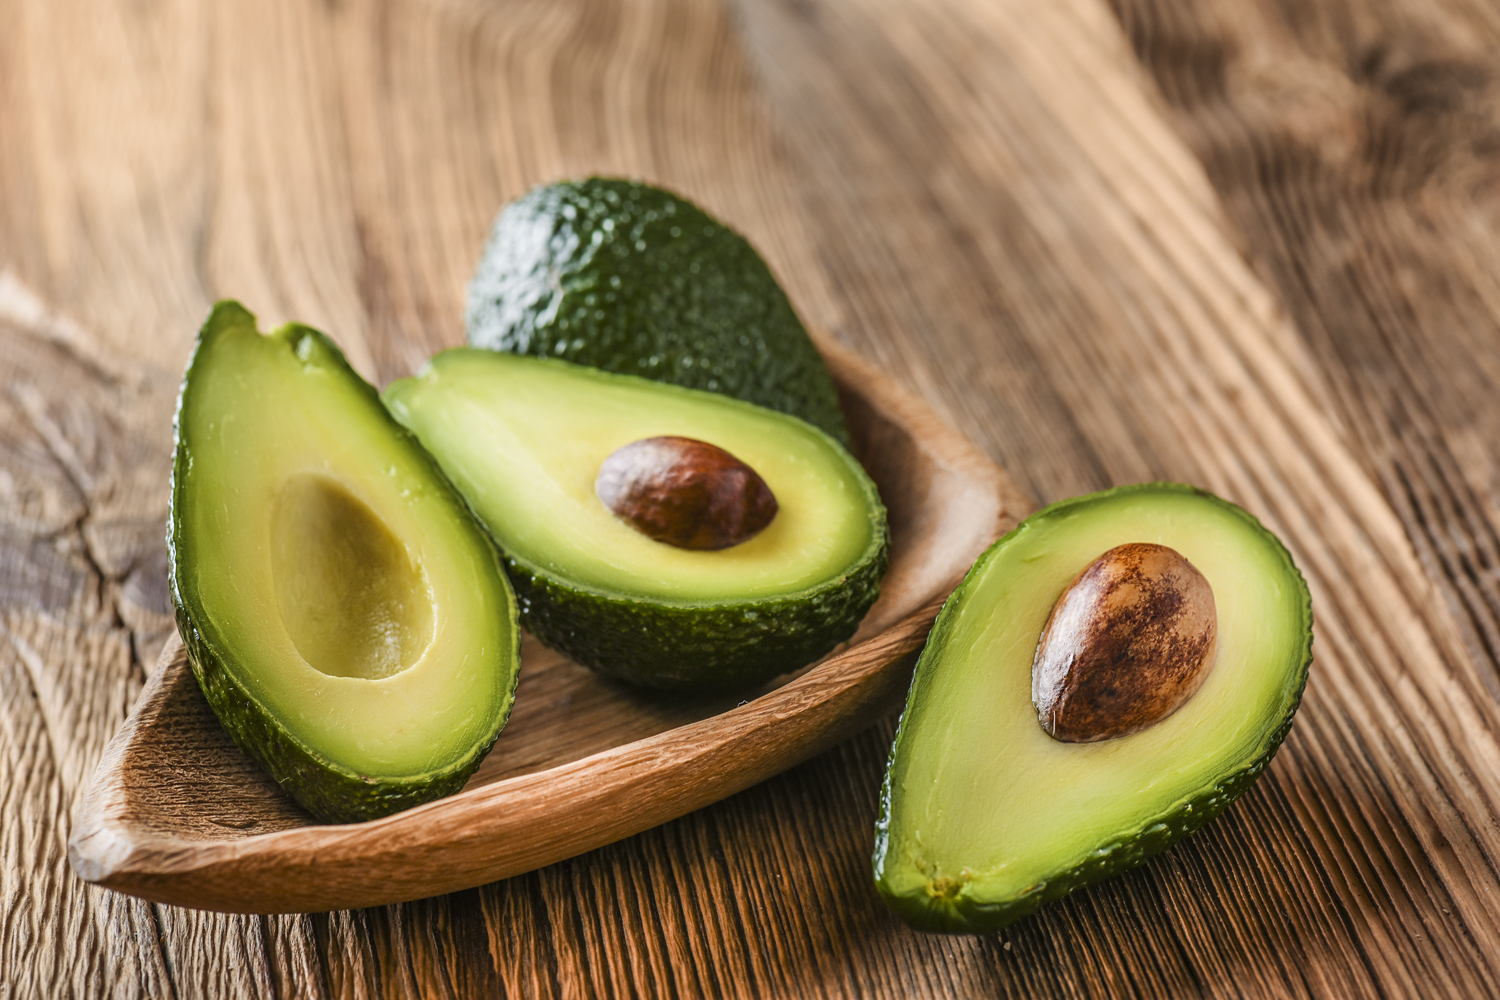 https://www.themanual.com/wp-content/uploads/sites/9/2021/04/the-ultimate-avocado-guide-getting-to-know-the-green-supreme.jpg?p=1